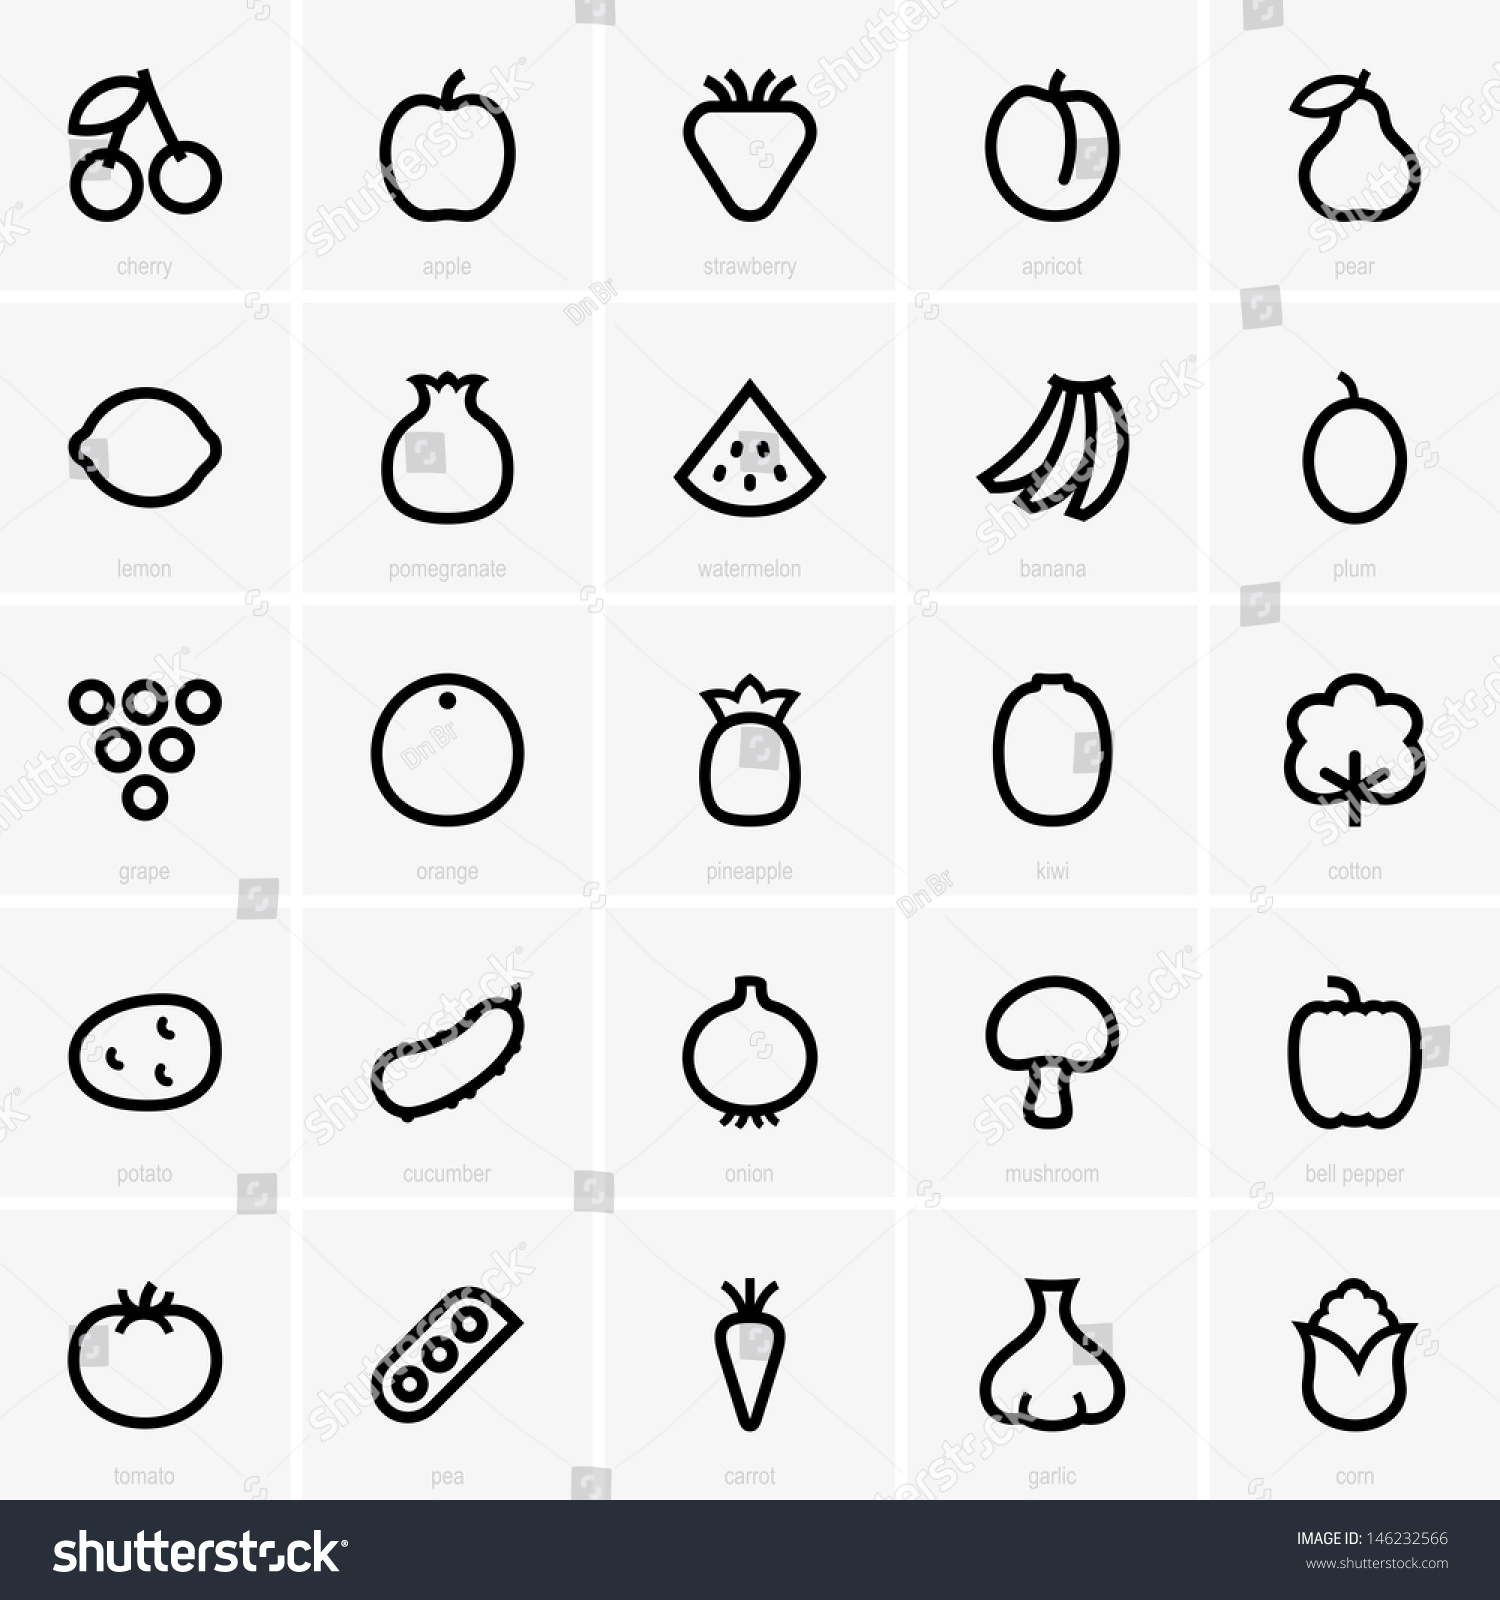 Fruits Vegetables Icons Stock Vector 146232566 - Shutterstock